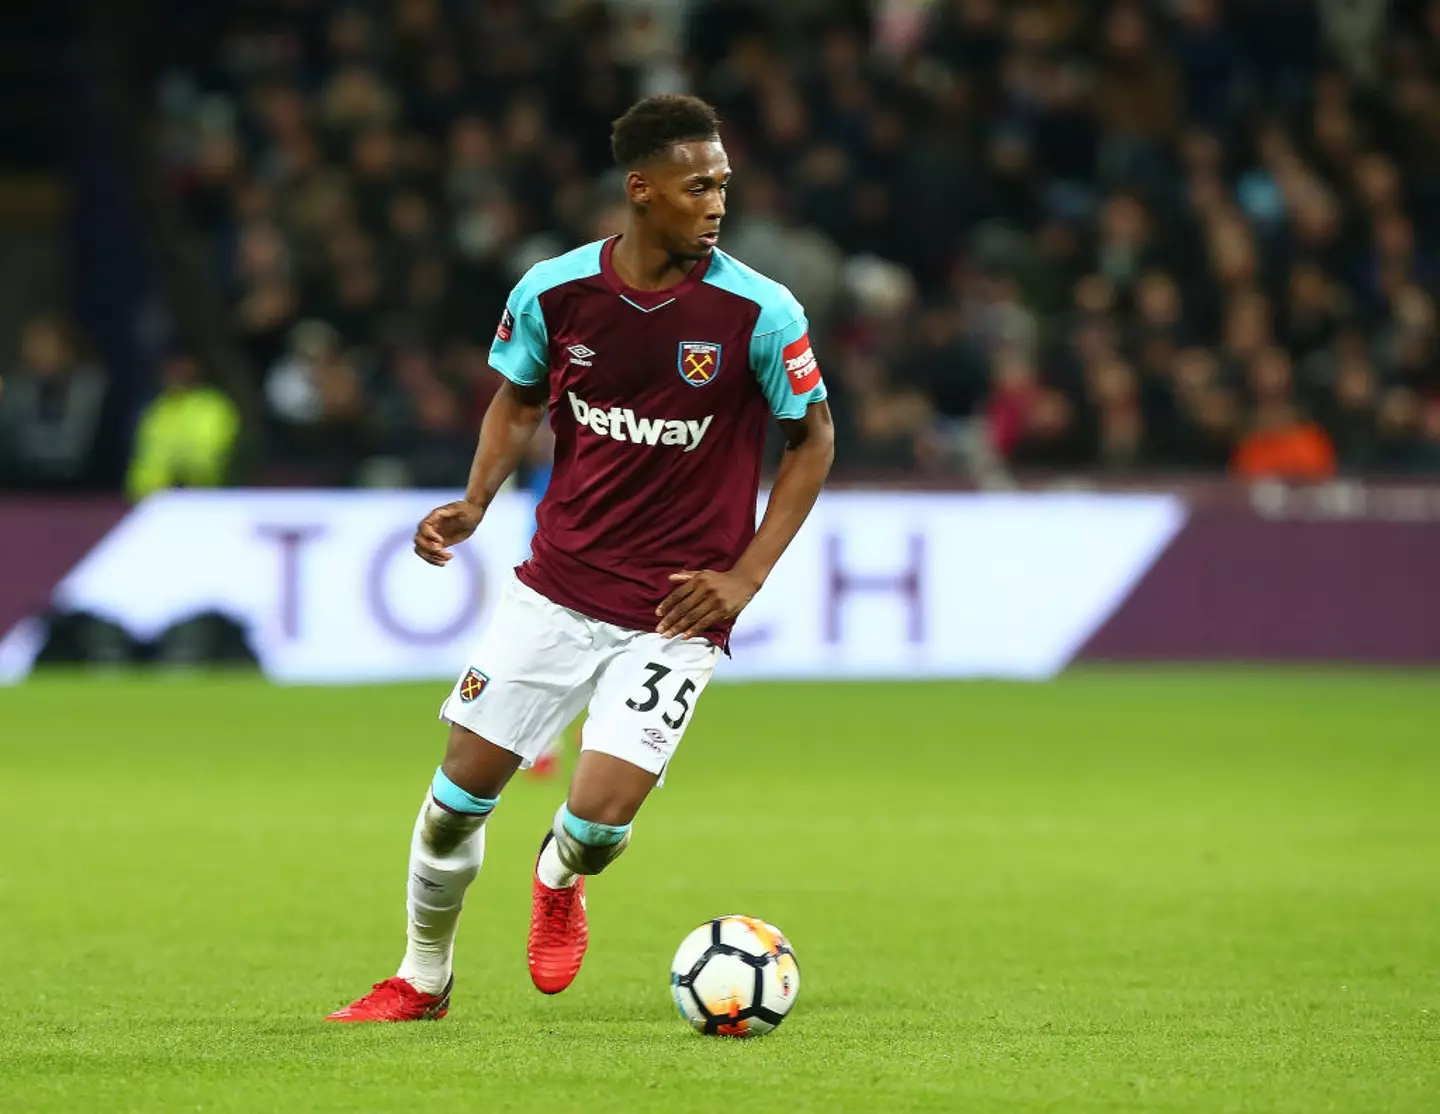 Reece Oxford playing for West Ham (Image: Getty)